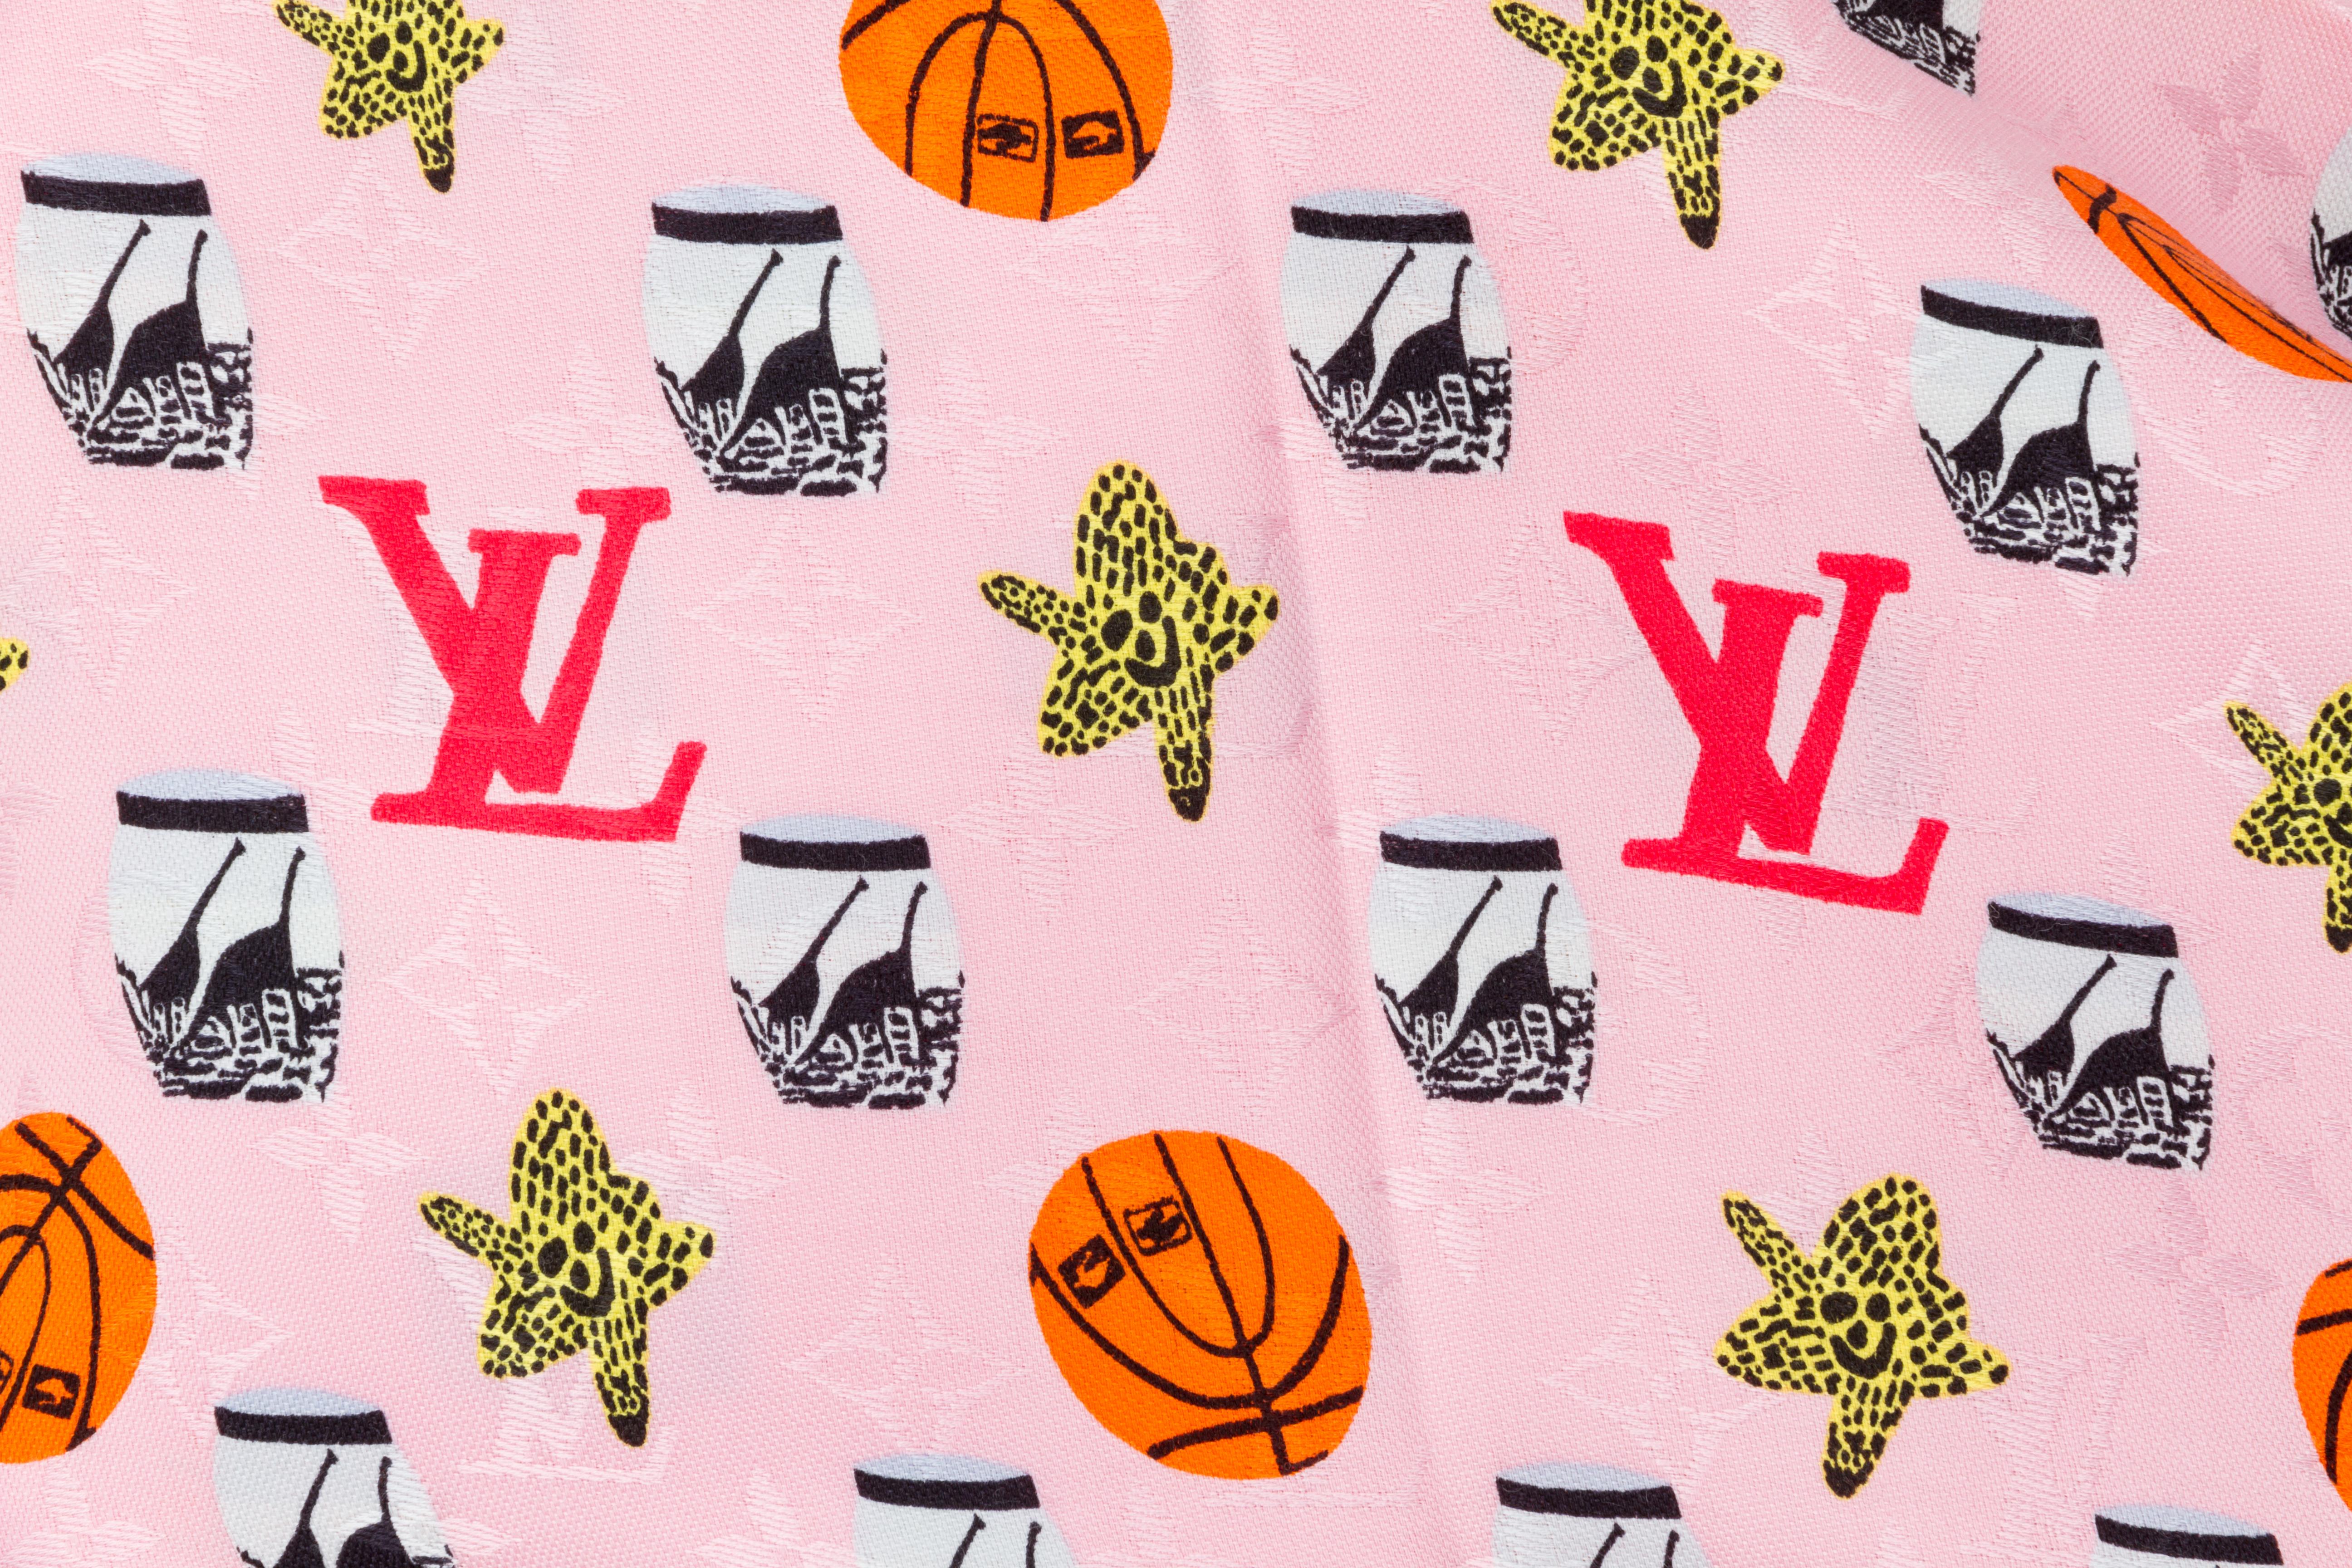 Louis Vuitton limited edition oversized pink silk and wool shawl with basketballs and logos design. Jacquard weave. Fringe finish. 
60% silk, 40% wool